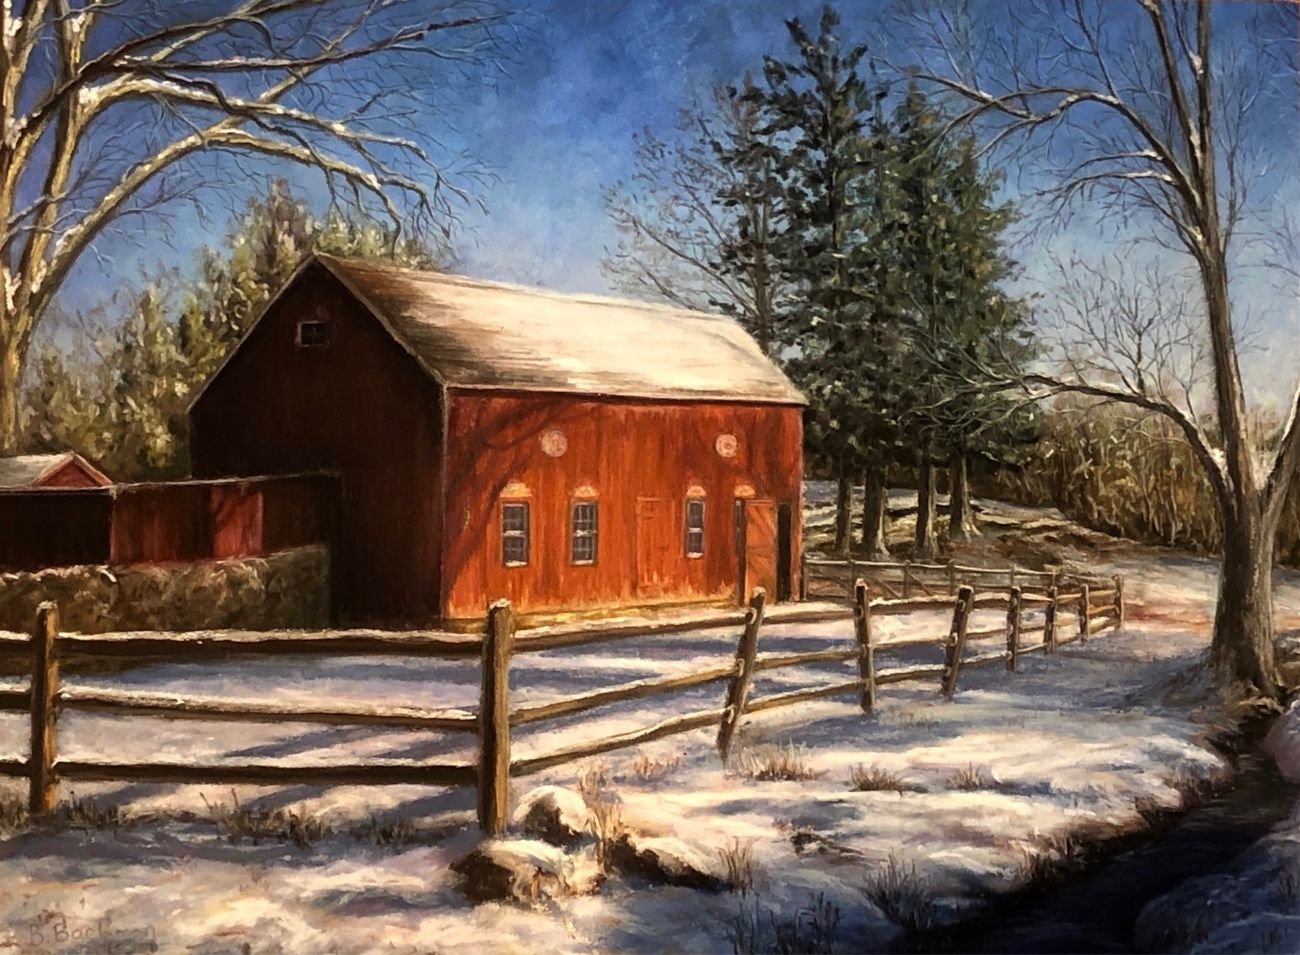 “January Morning” is among the works that will be on view at the Makers Alley exhibition.